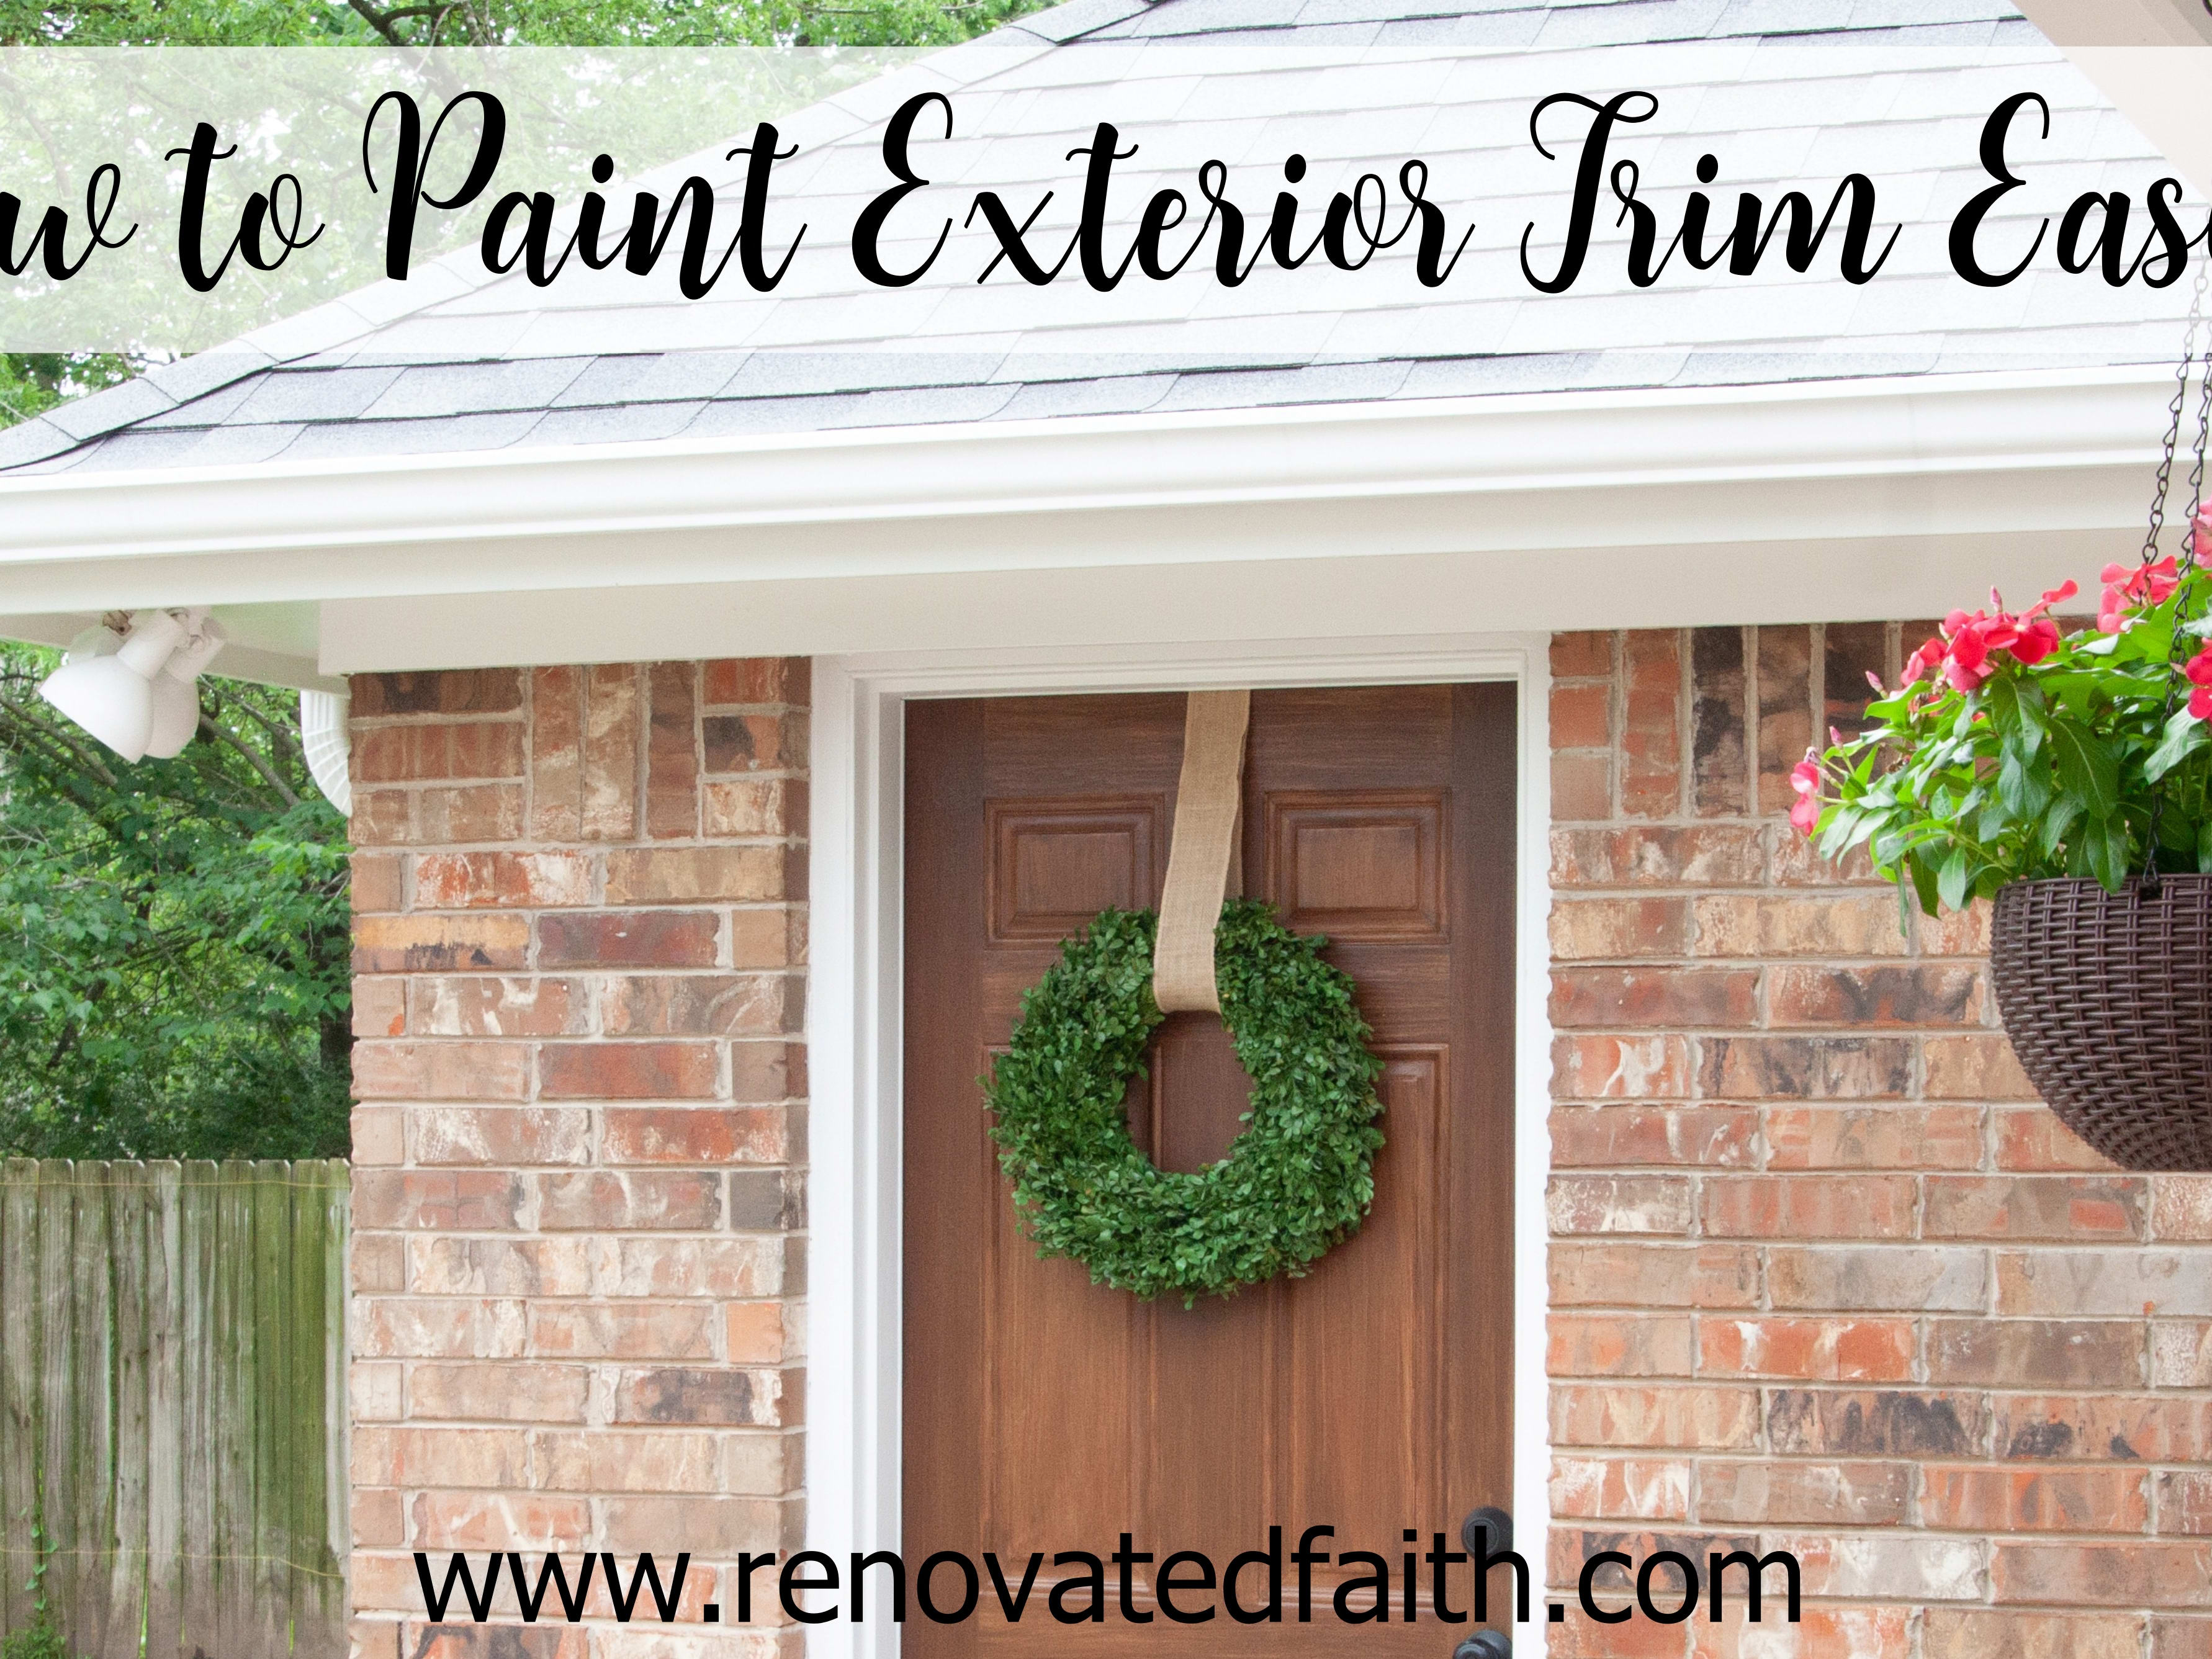 Lead Paint Removal: Get Rid of Exterior House Paint - This Old House